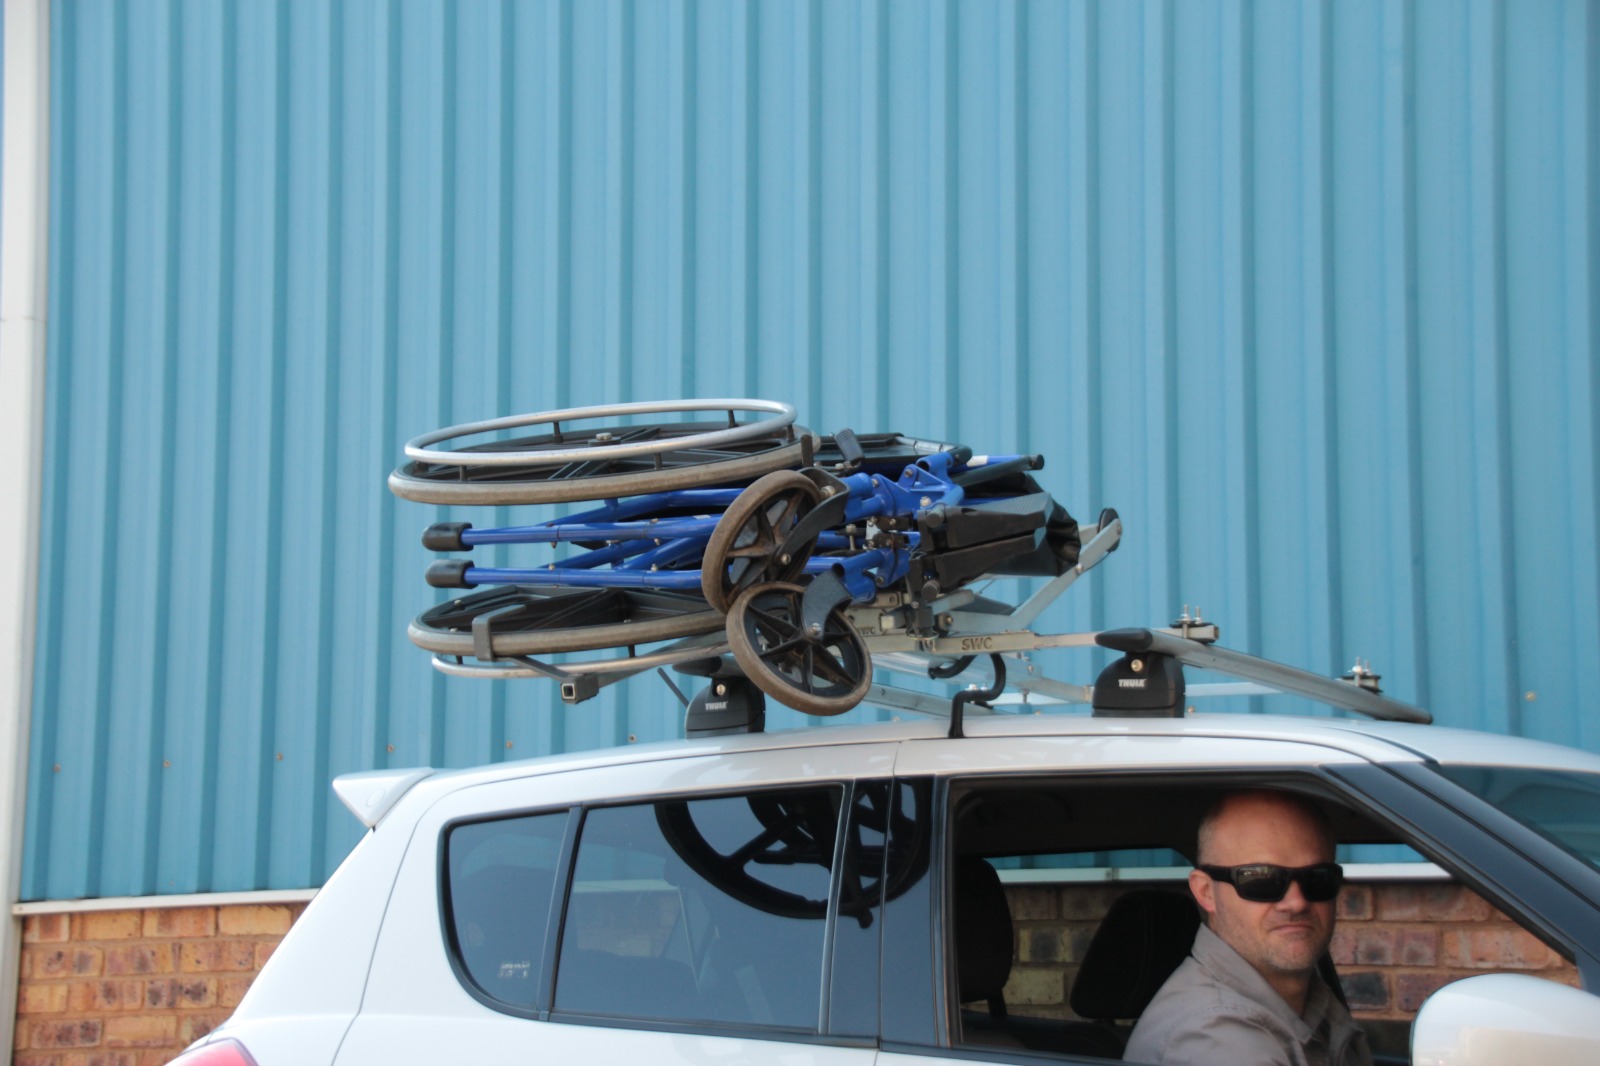 Wheelchair safely and securely loaded onto roof of car